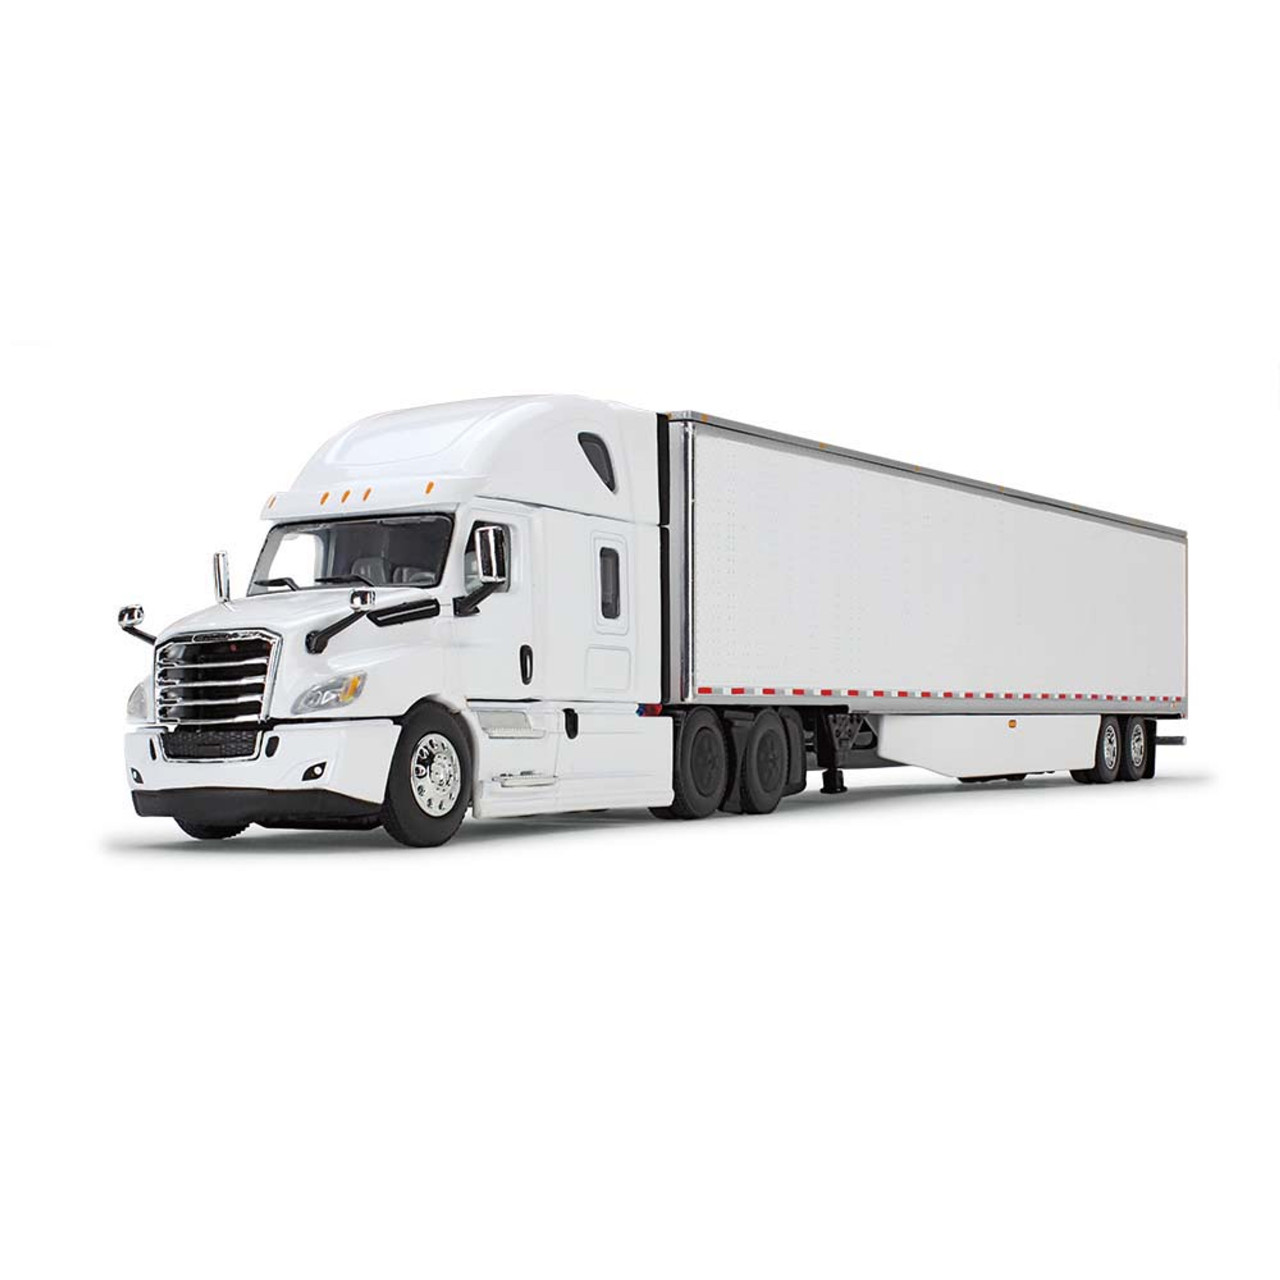 DCP - White/White Freightliner 2018 Cascadia High-Roof Sleeper & 53' Utility Trailer With Skirts